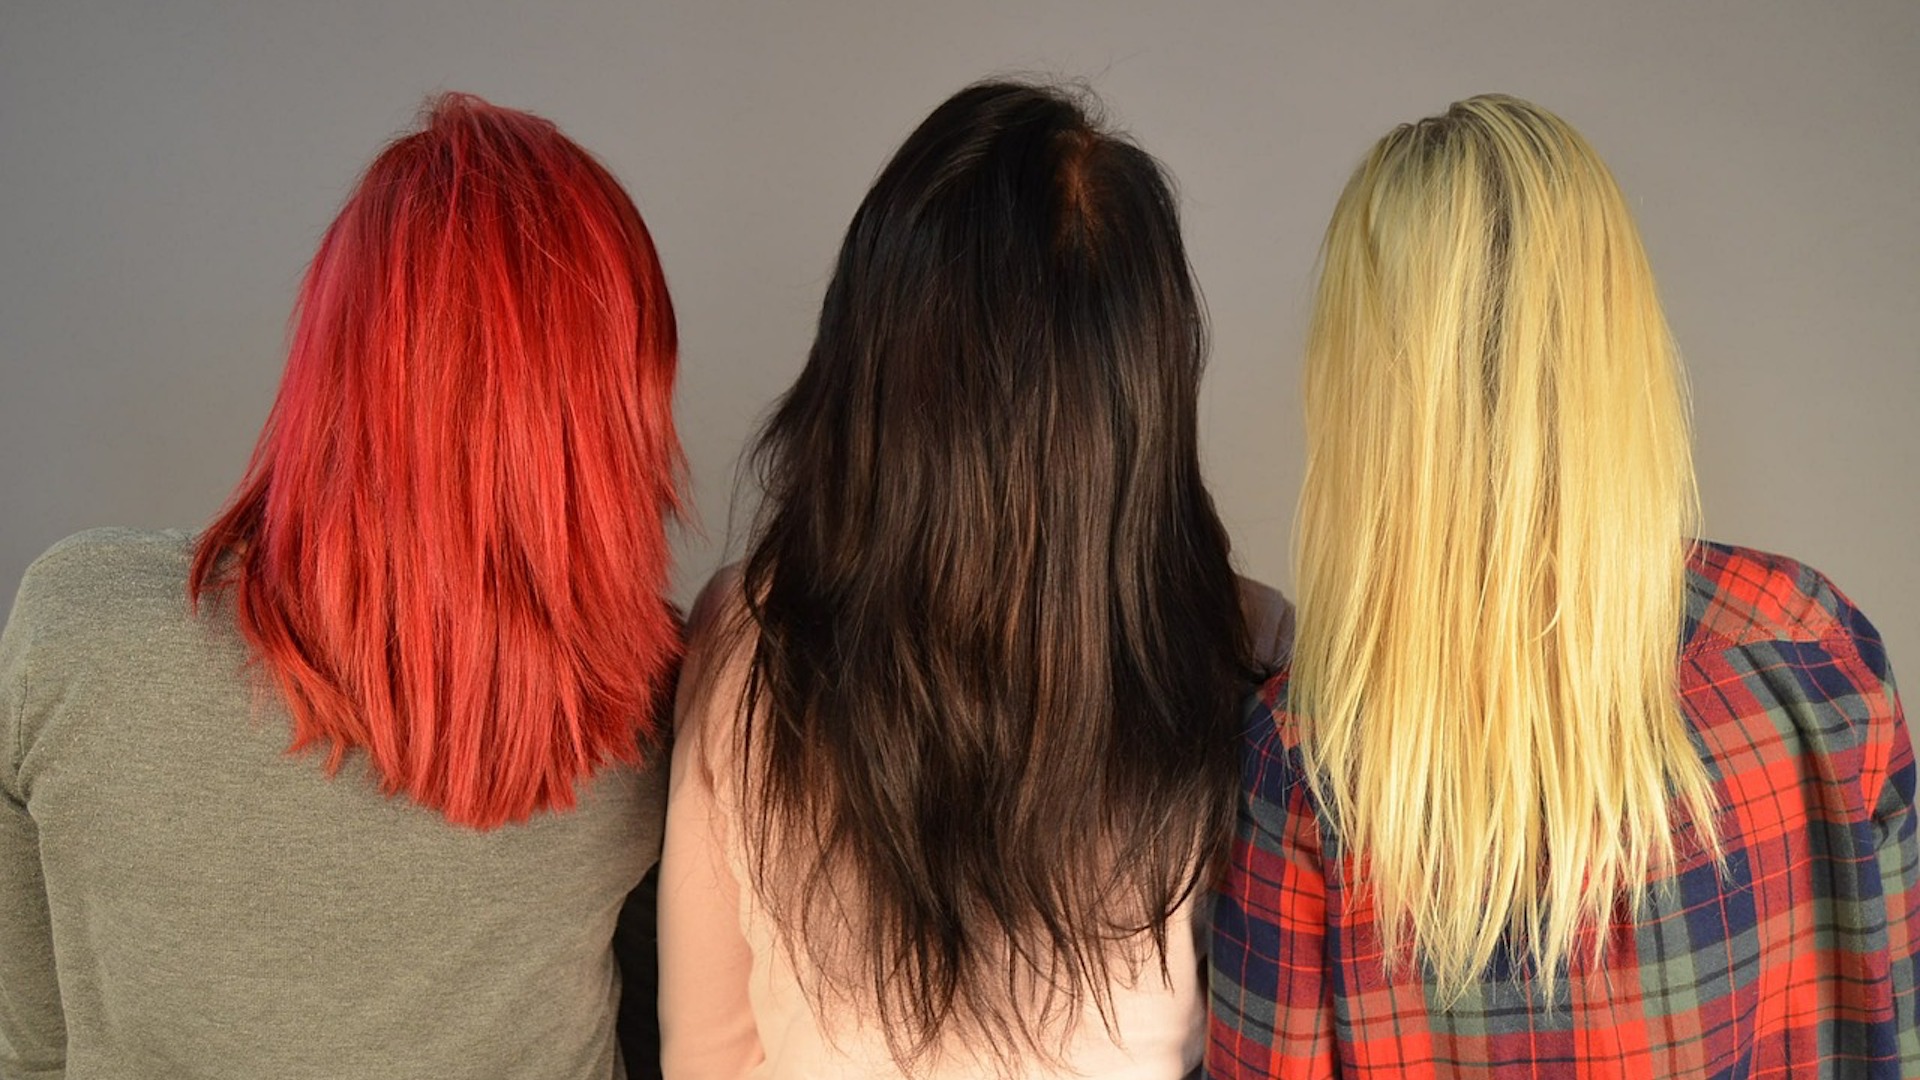 Three people with different coloured hair